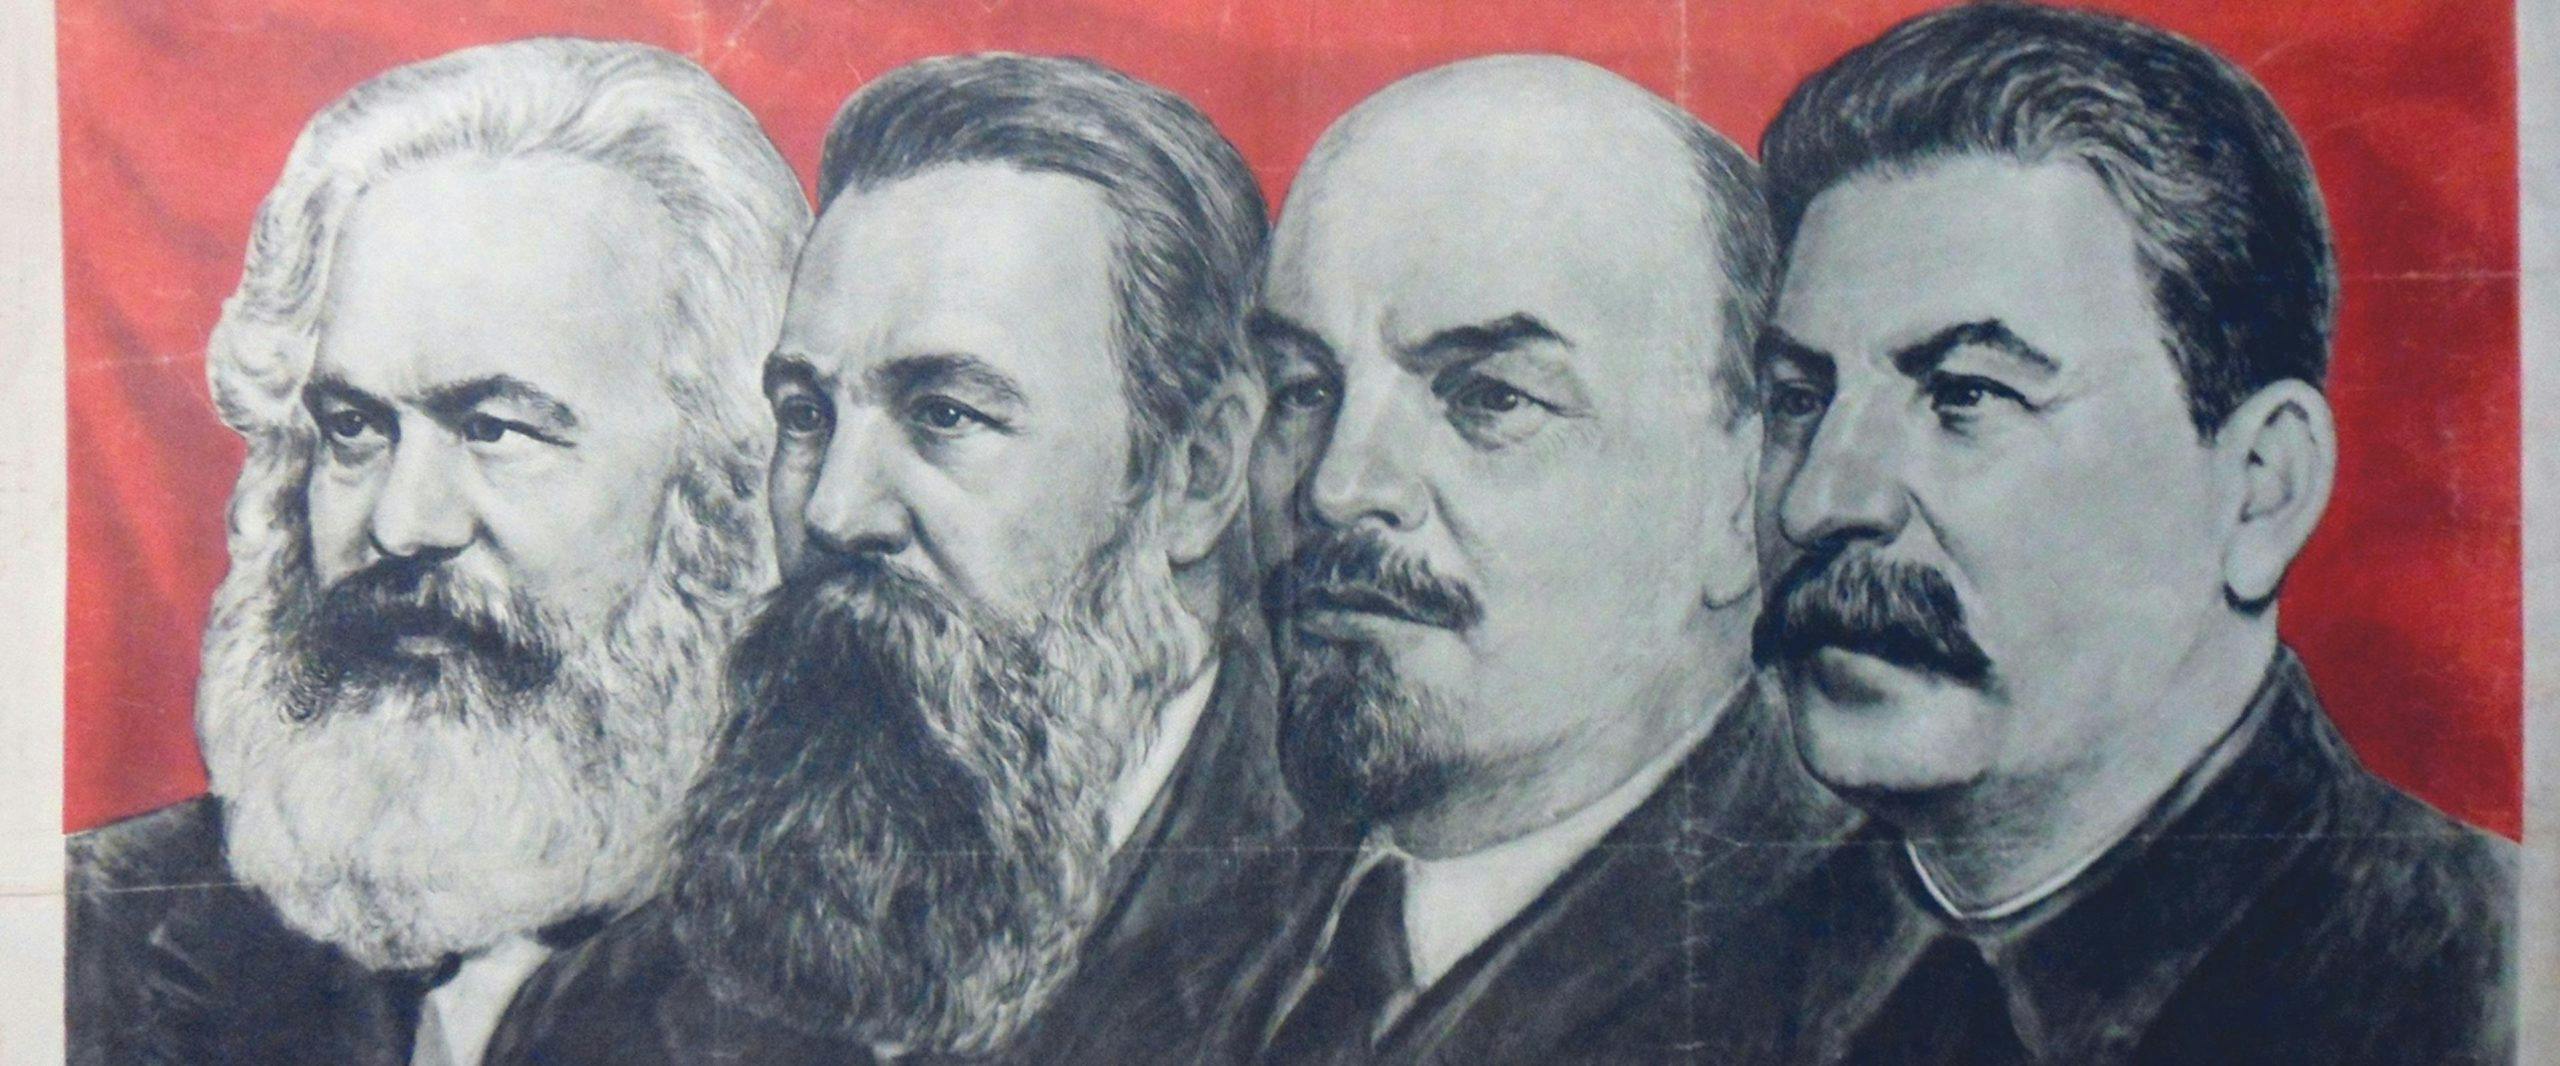 Four men, all with moustaches and two with beards, are shown in black and white against a red background.